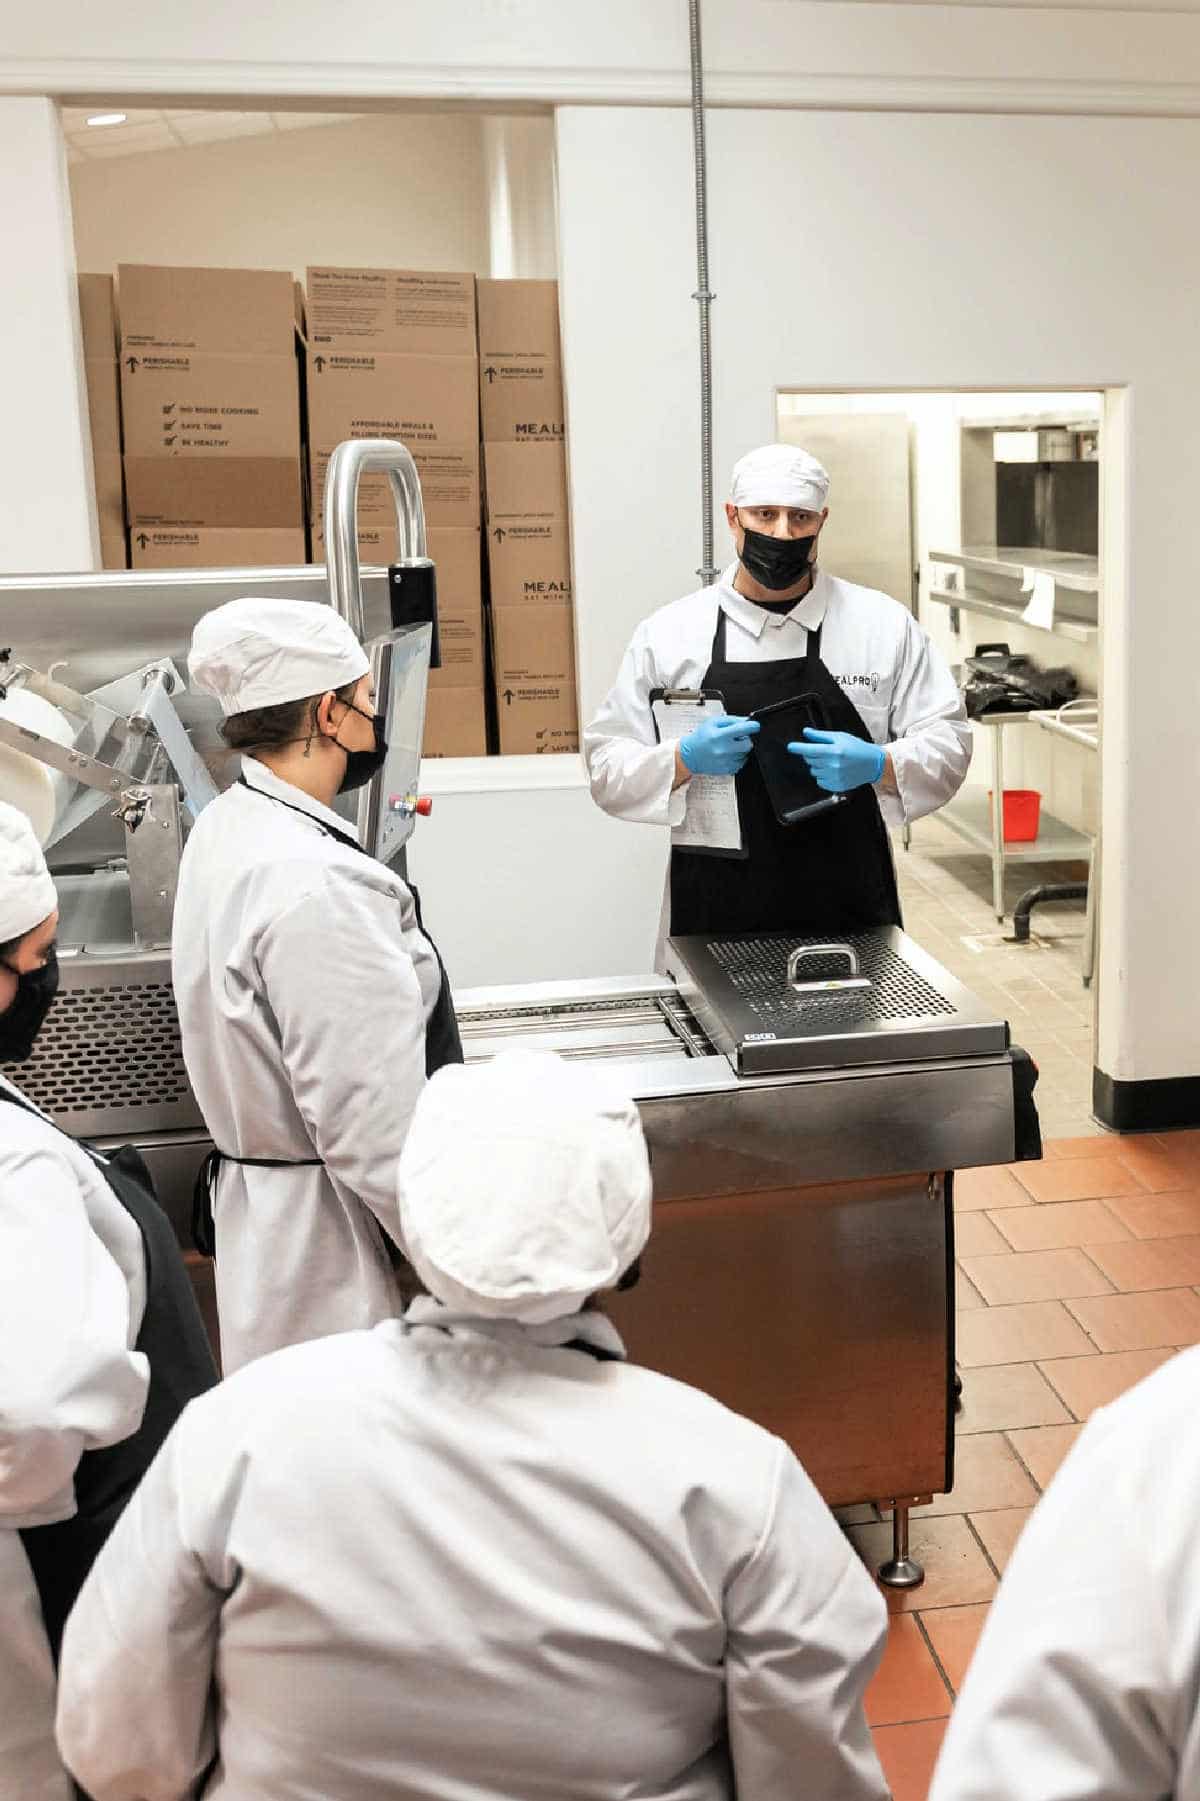 A culinary instructor teaching students at a culinary school.